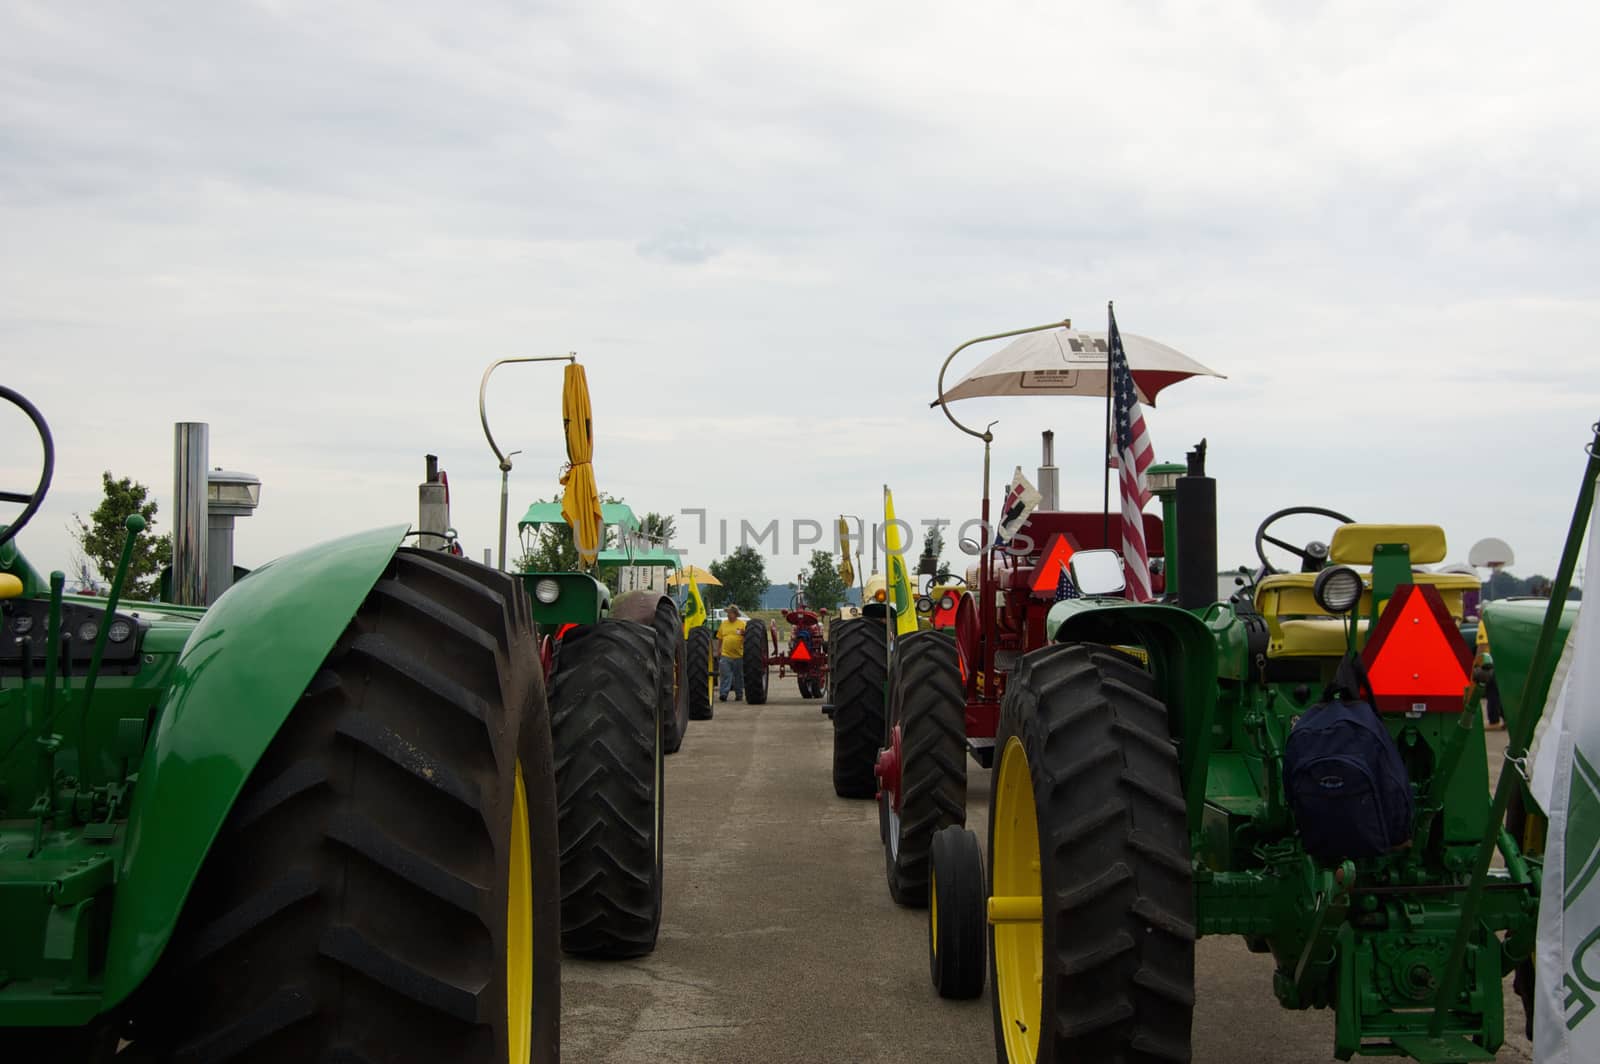 This is group of tractors waiting for the start of an early morning tractor ride.